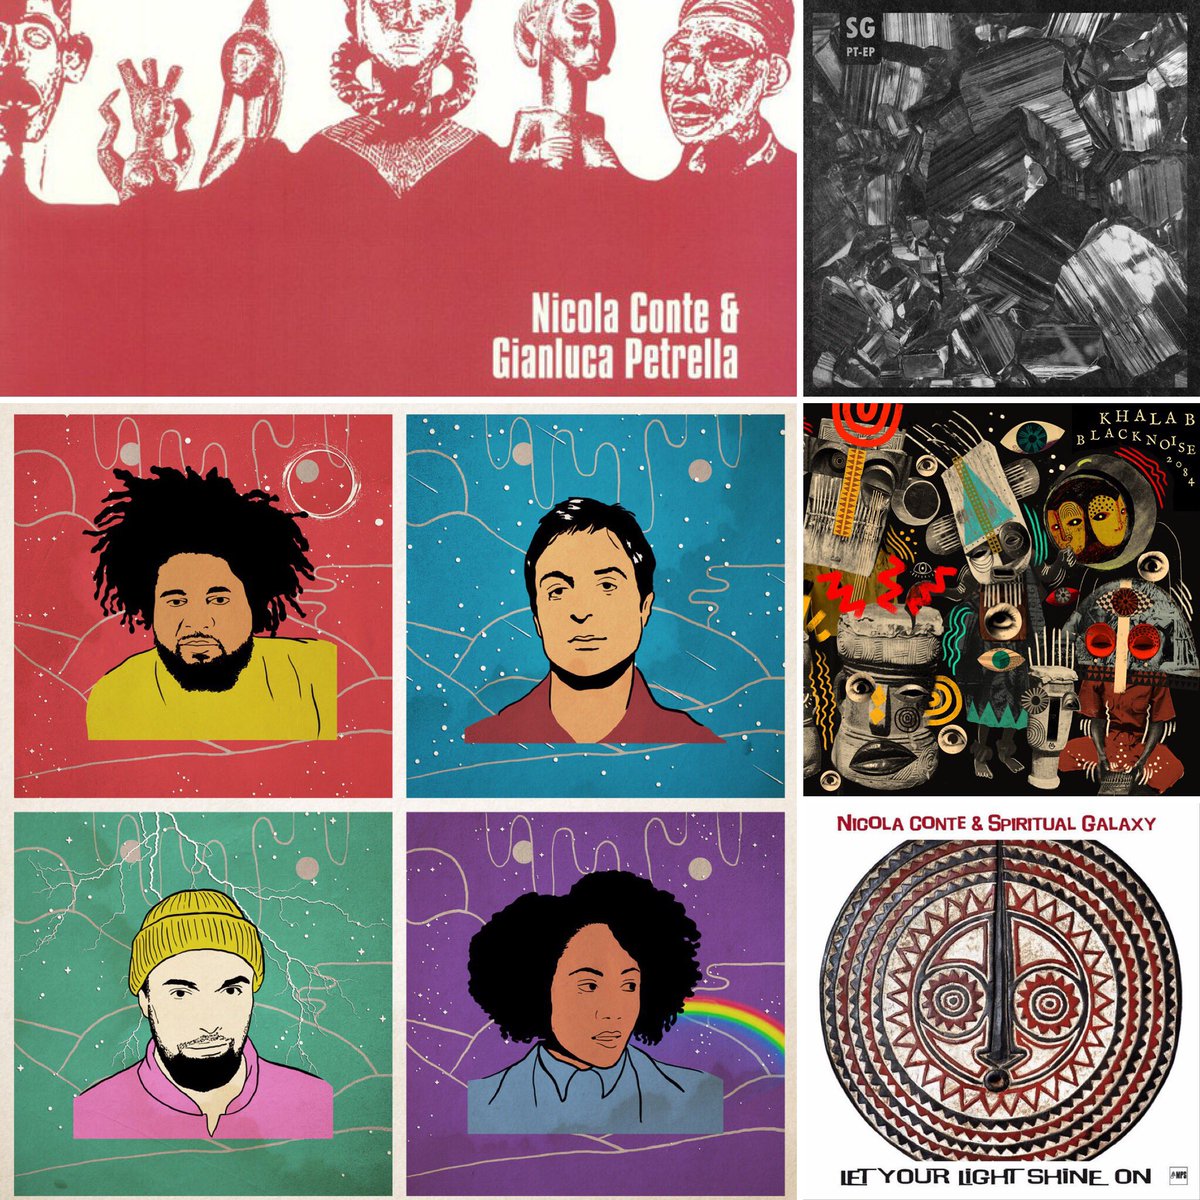 All albums & EPs released in 2018 I was involved in! THX @djkhalab @nicolaconte #gianlucapetrella & #sonarghost 4 including me in ur vision & @AfrikanSciences @alexattias @neonataliemay @emanative @markdeclivelowe @ropeadope for the support on #Aforemention #Remixed